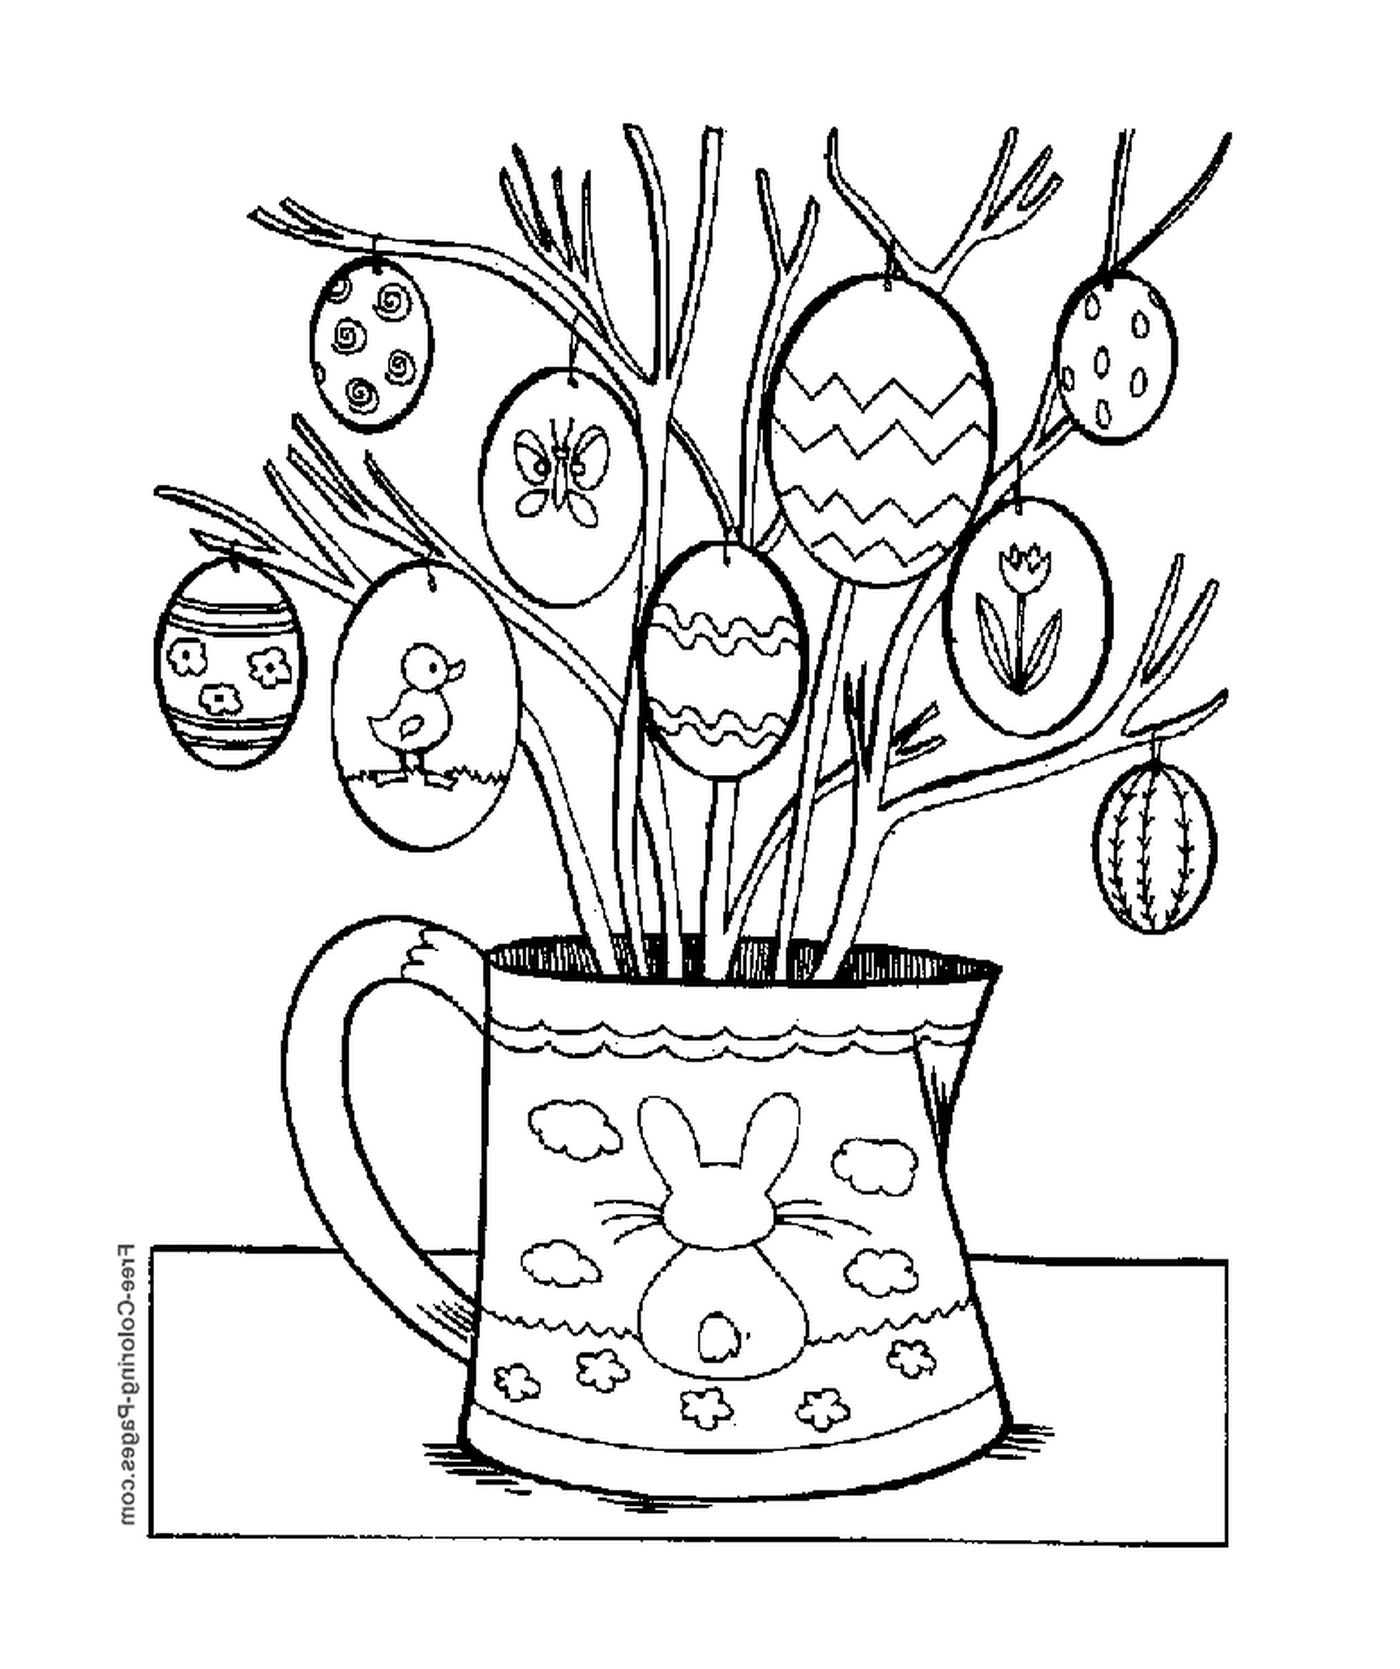  A vase filled with branches and eggs 